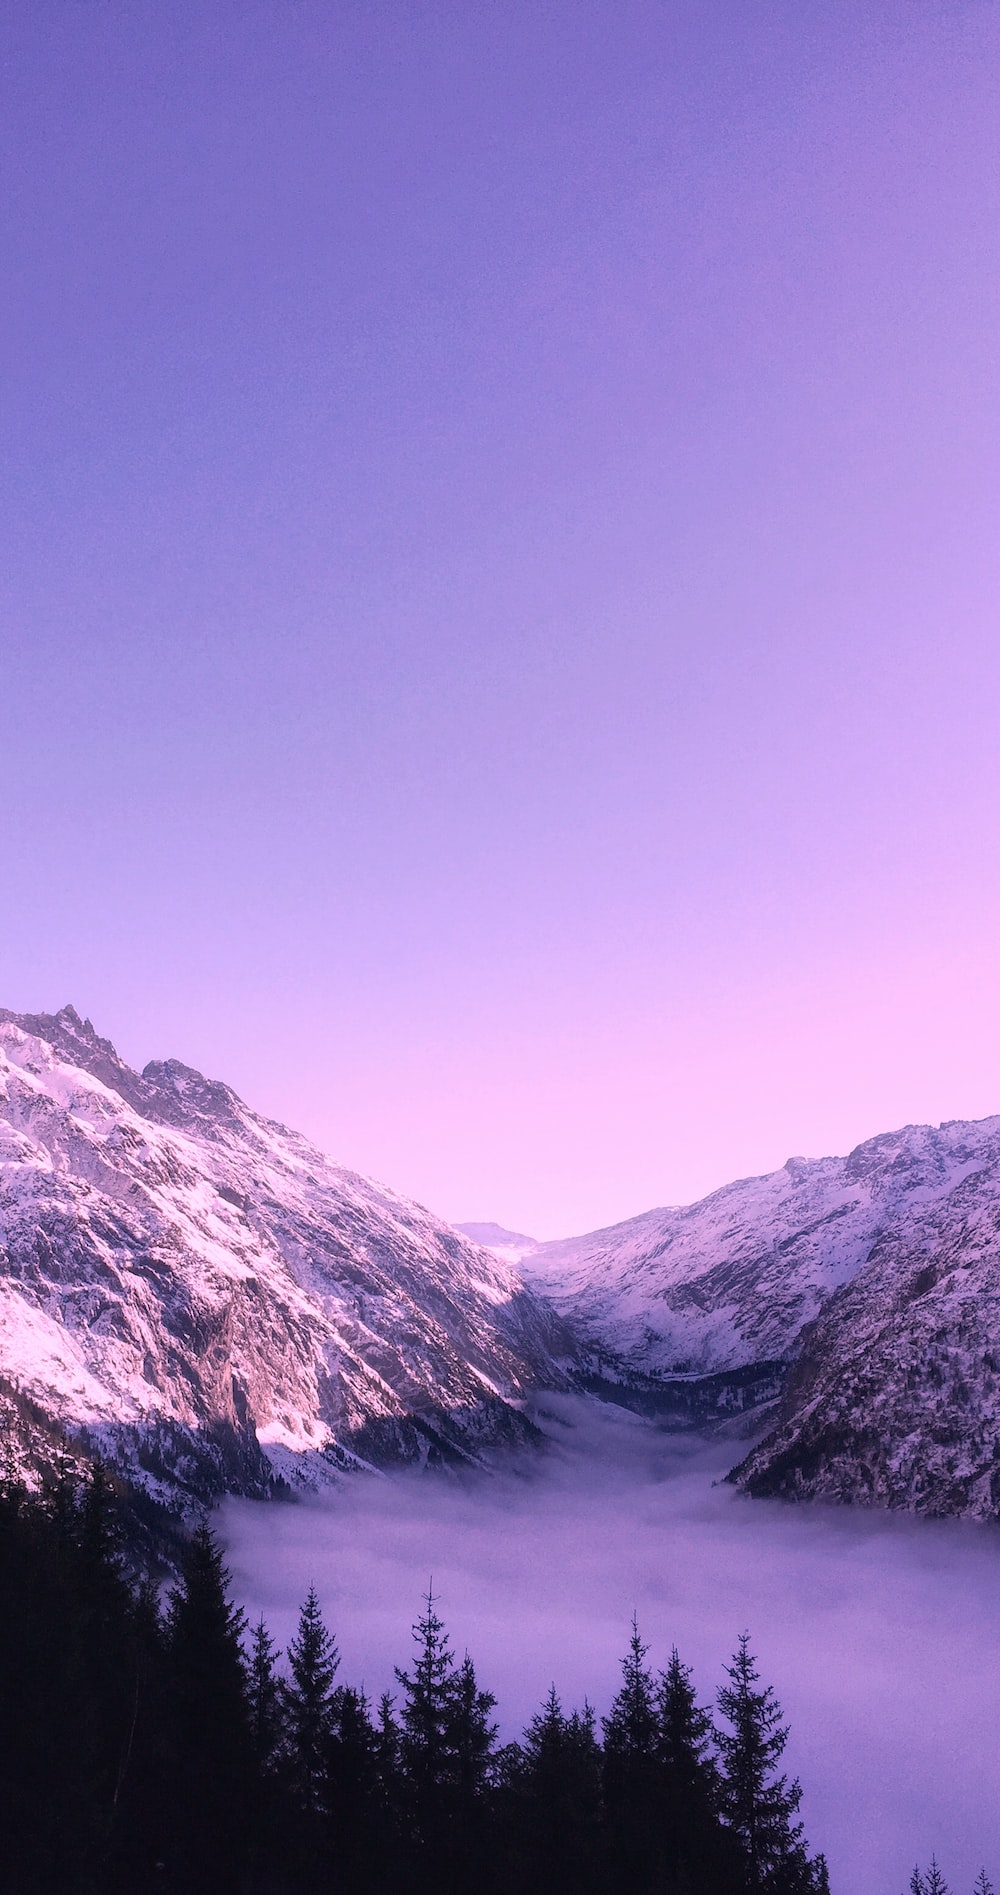 Purple Mountain Picture. Download Free Image